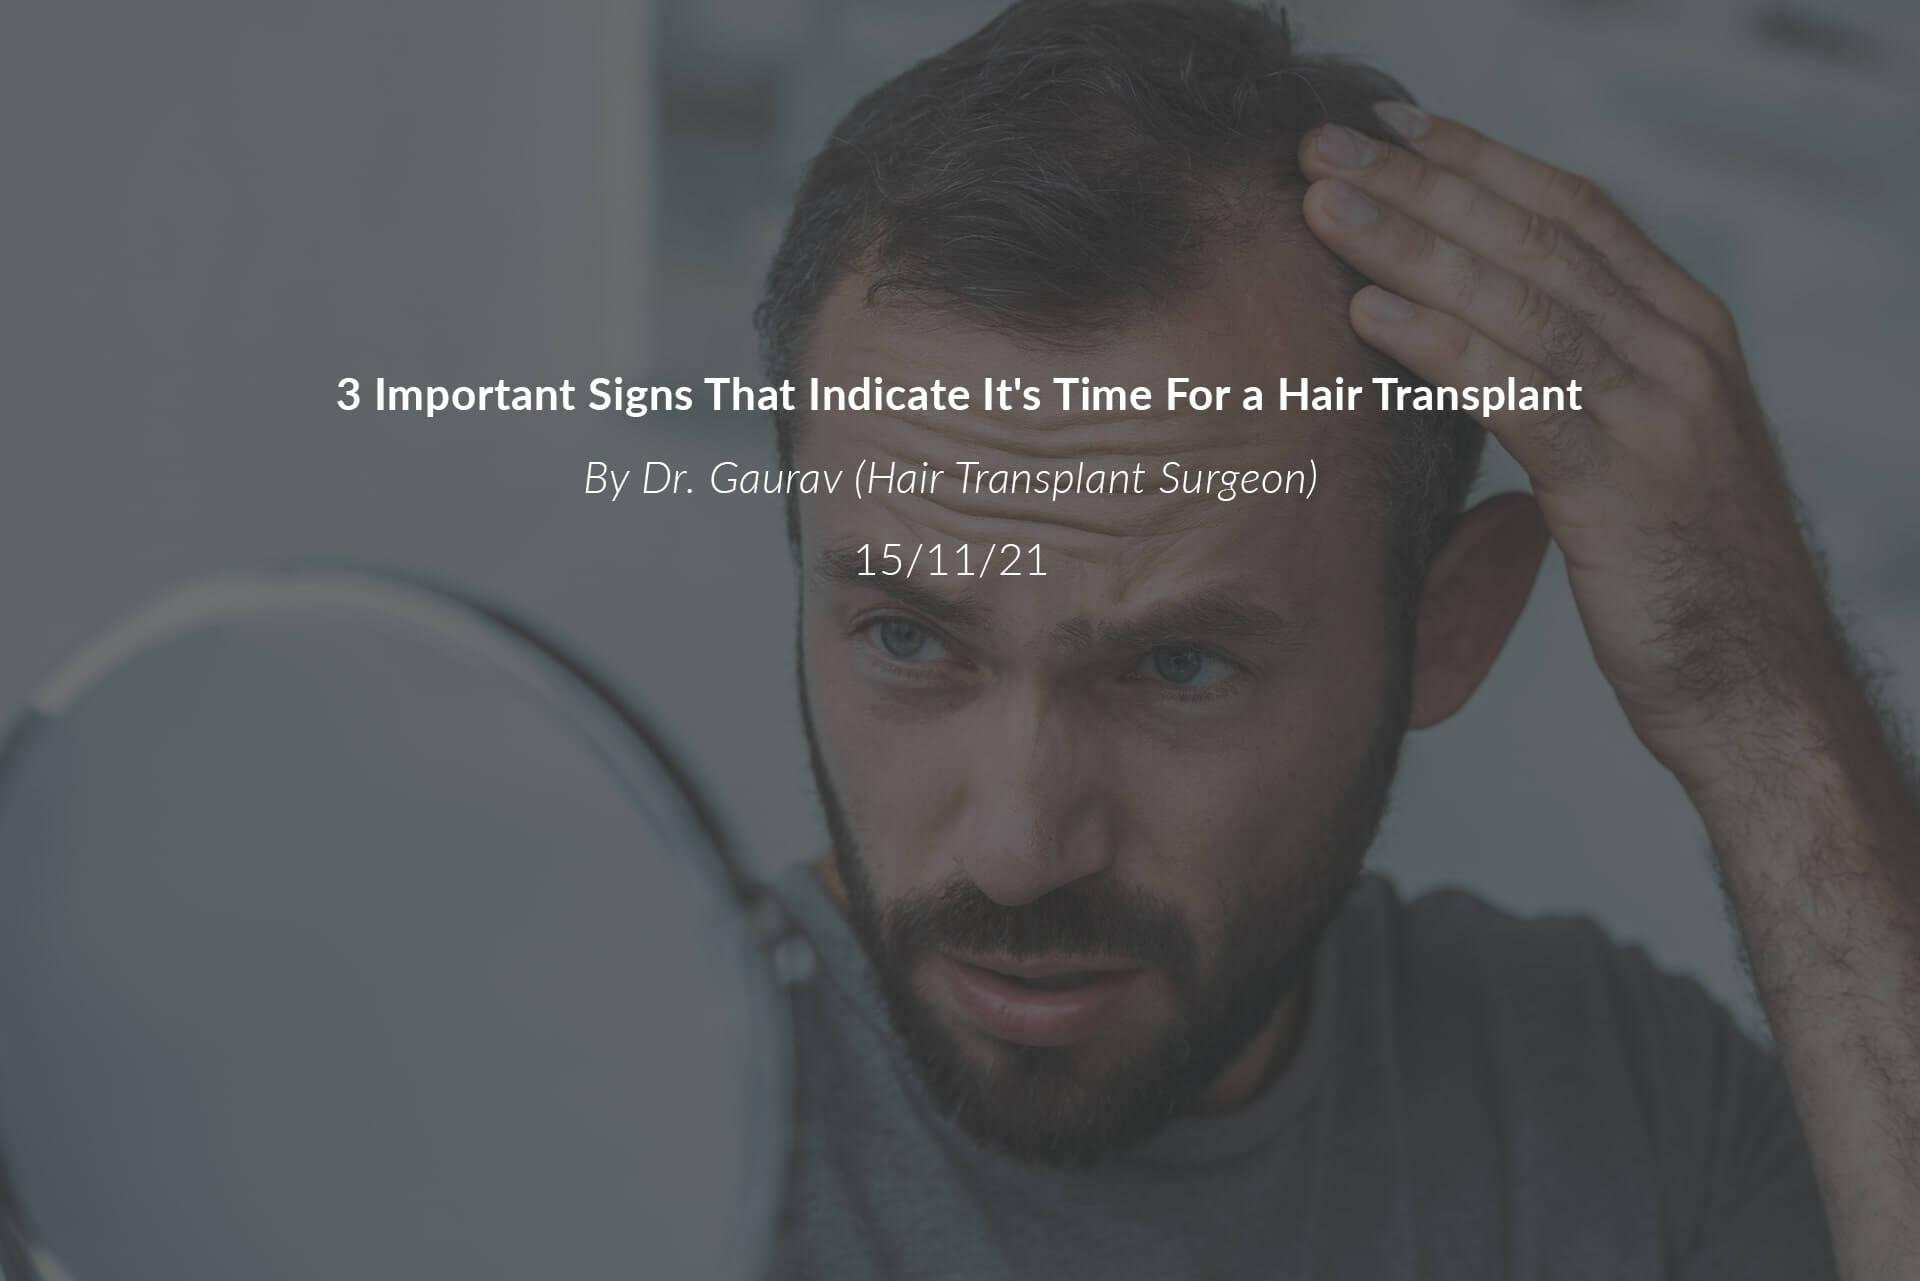 3 Important Signs That Indicate It's Time For a Hair Transplant